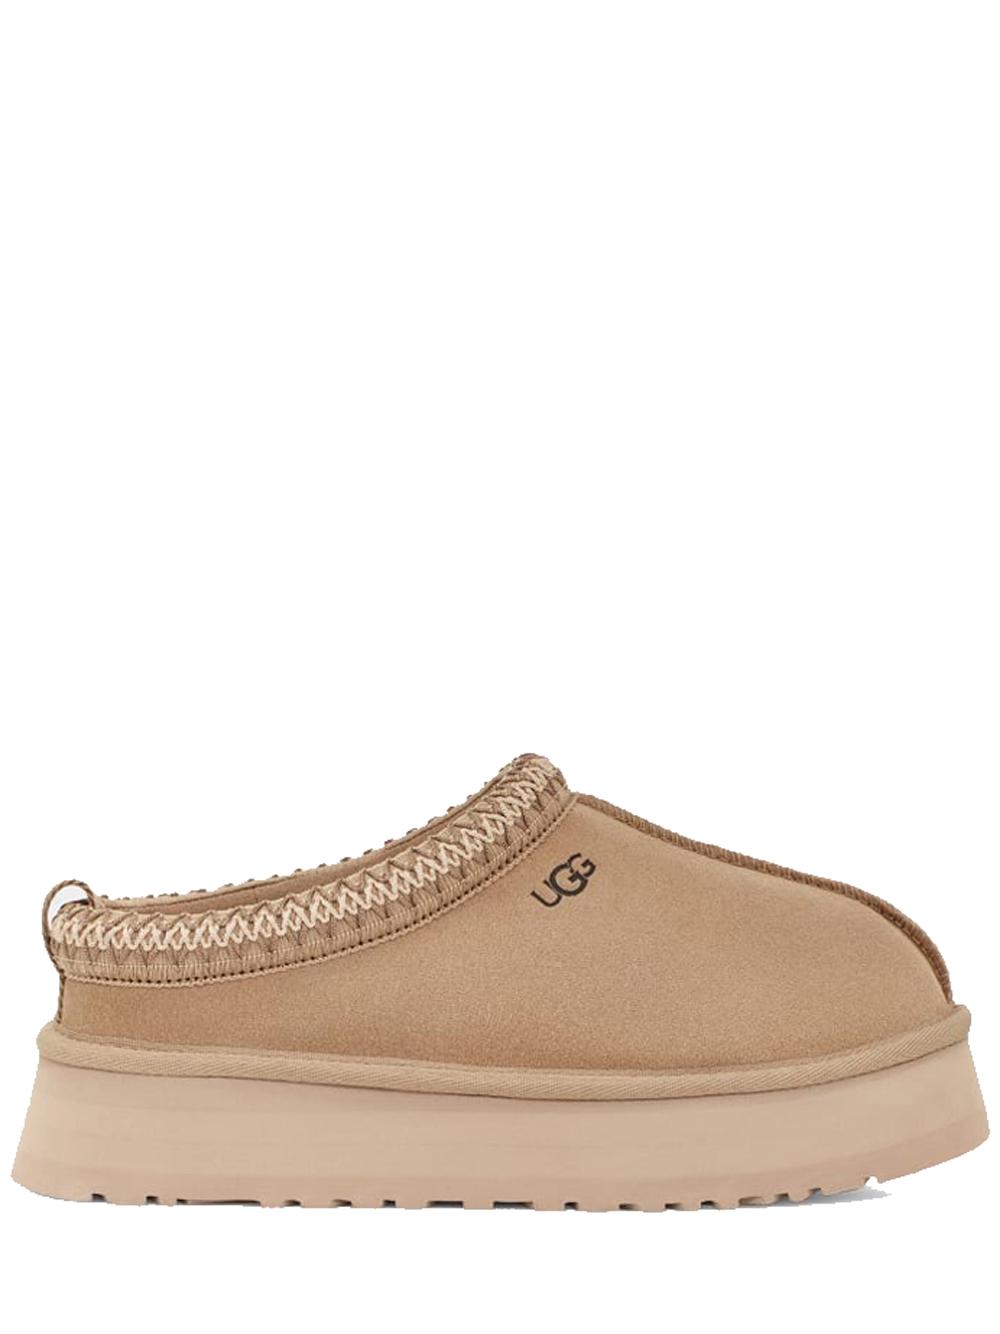 UGG Tazz Mules Beige In Leather in Brown | Lyst